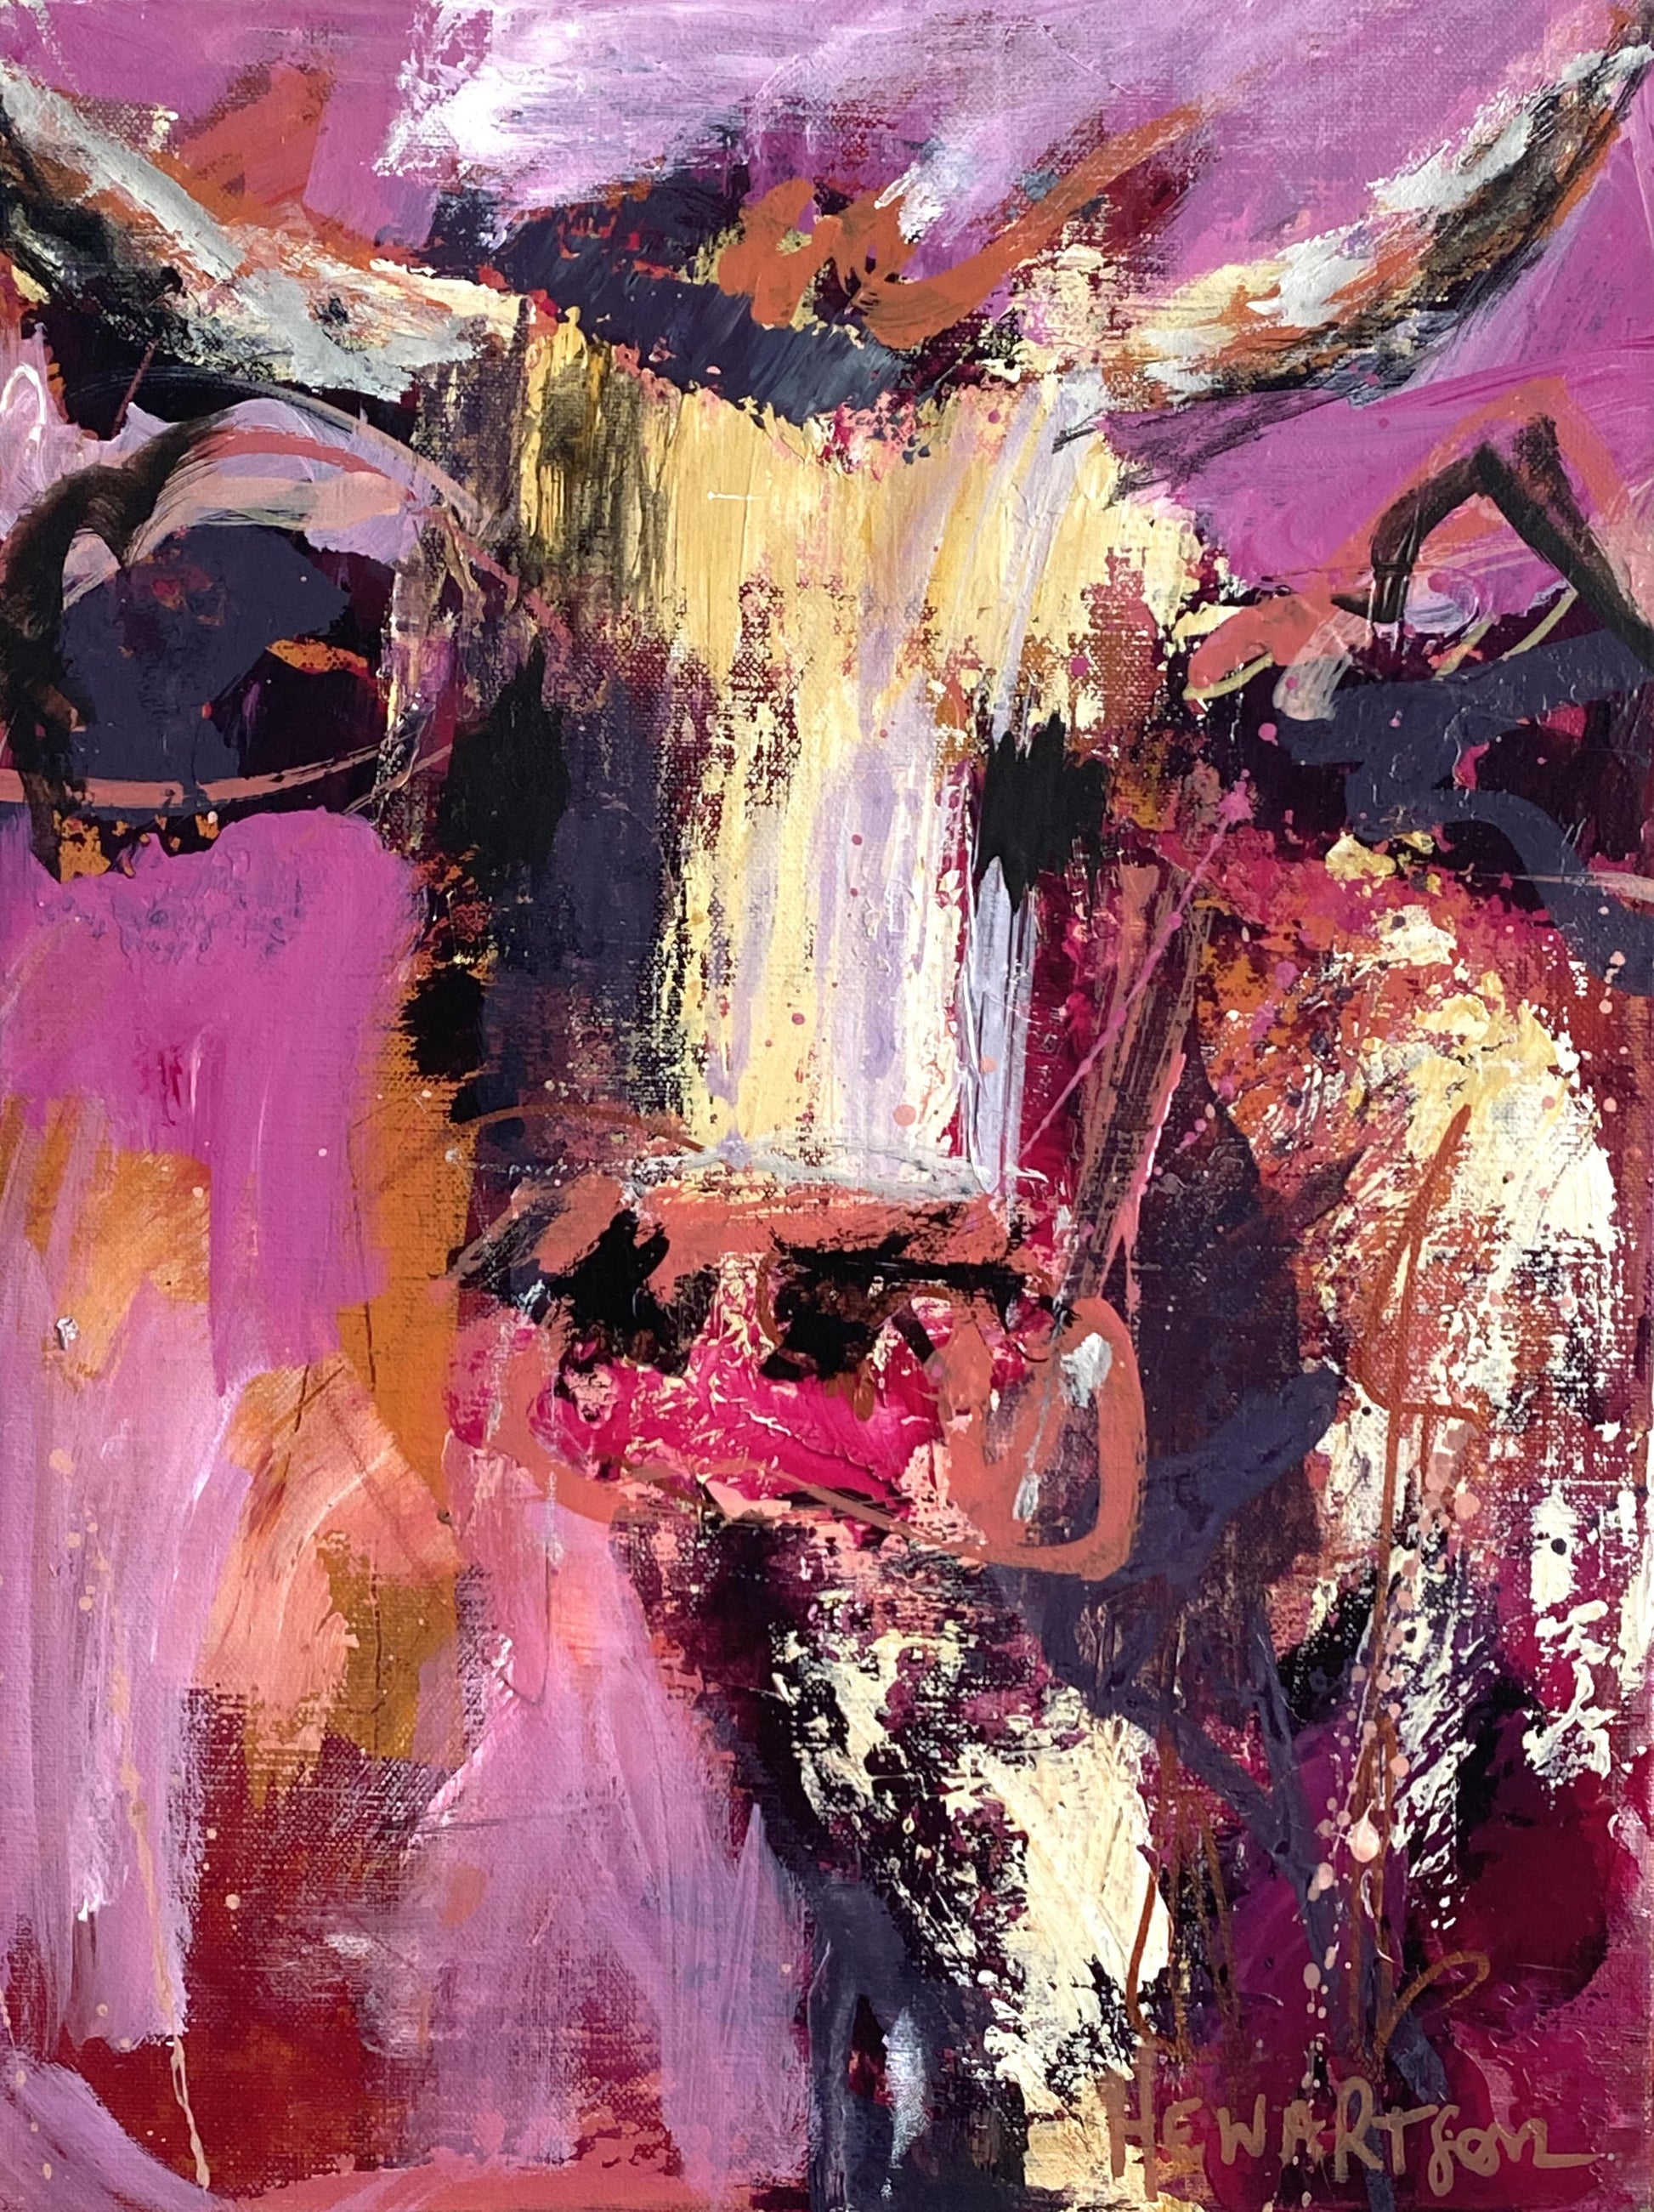 Rocky- by Australian Artist Rose Hewartson Original Abstract Cow Painting on Canvas Framed 31 x 41cm